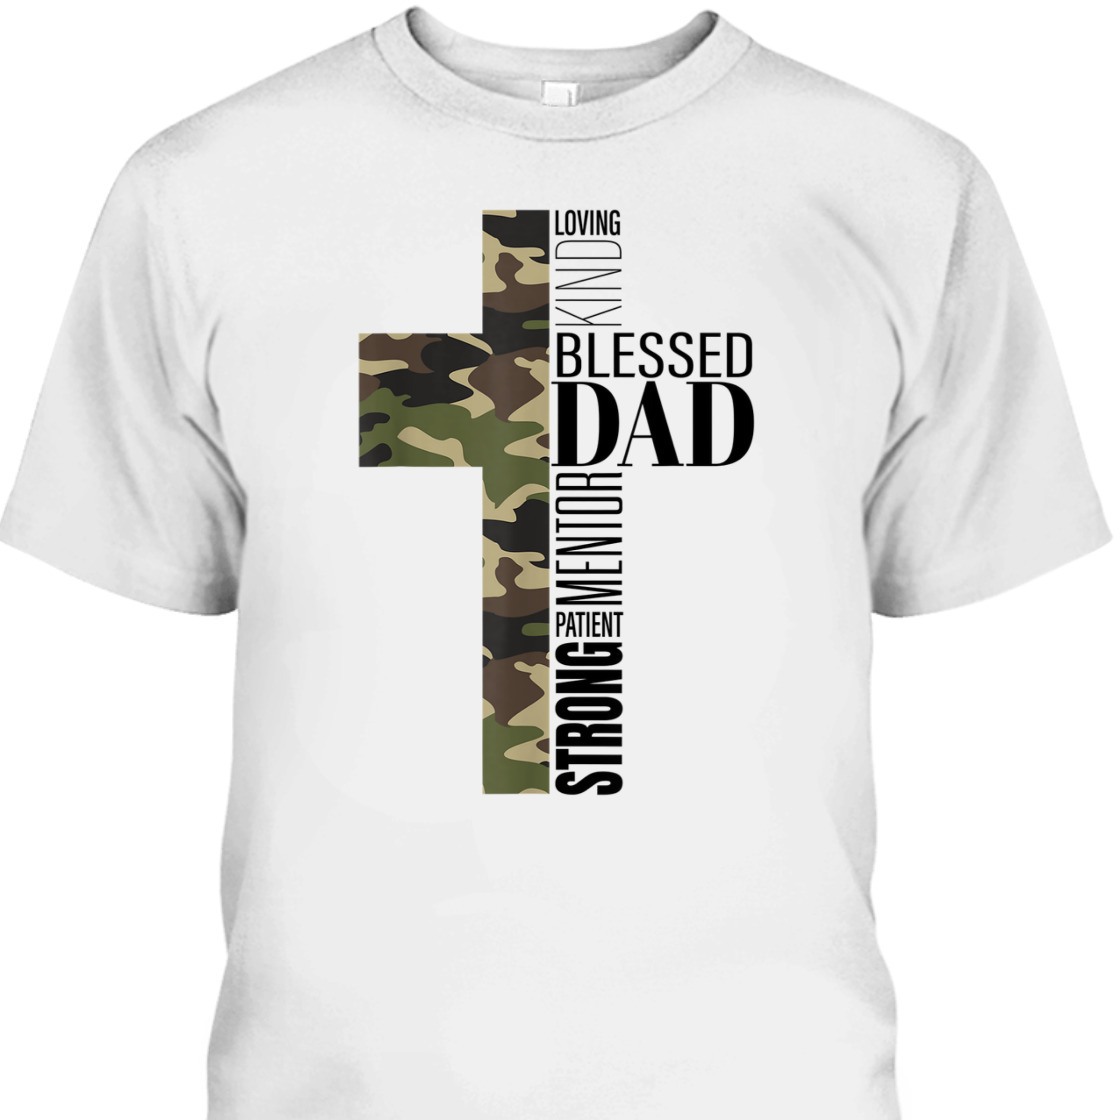 Loving Kind Blessed Strong Patient Mentor Dad Fathers Day Religious T-Shirt